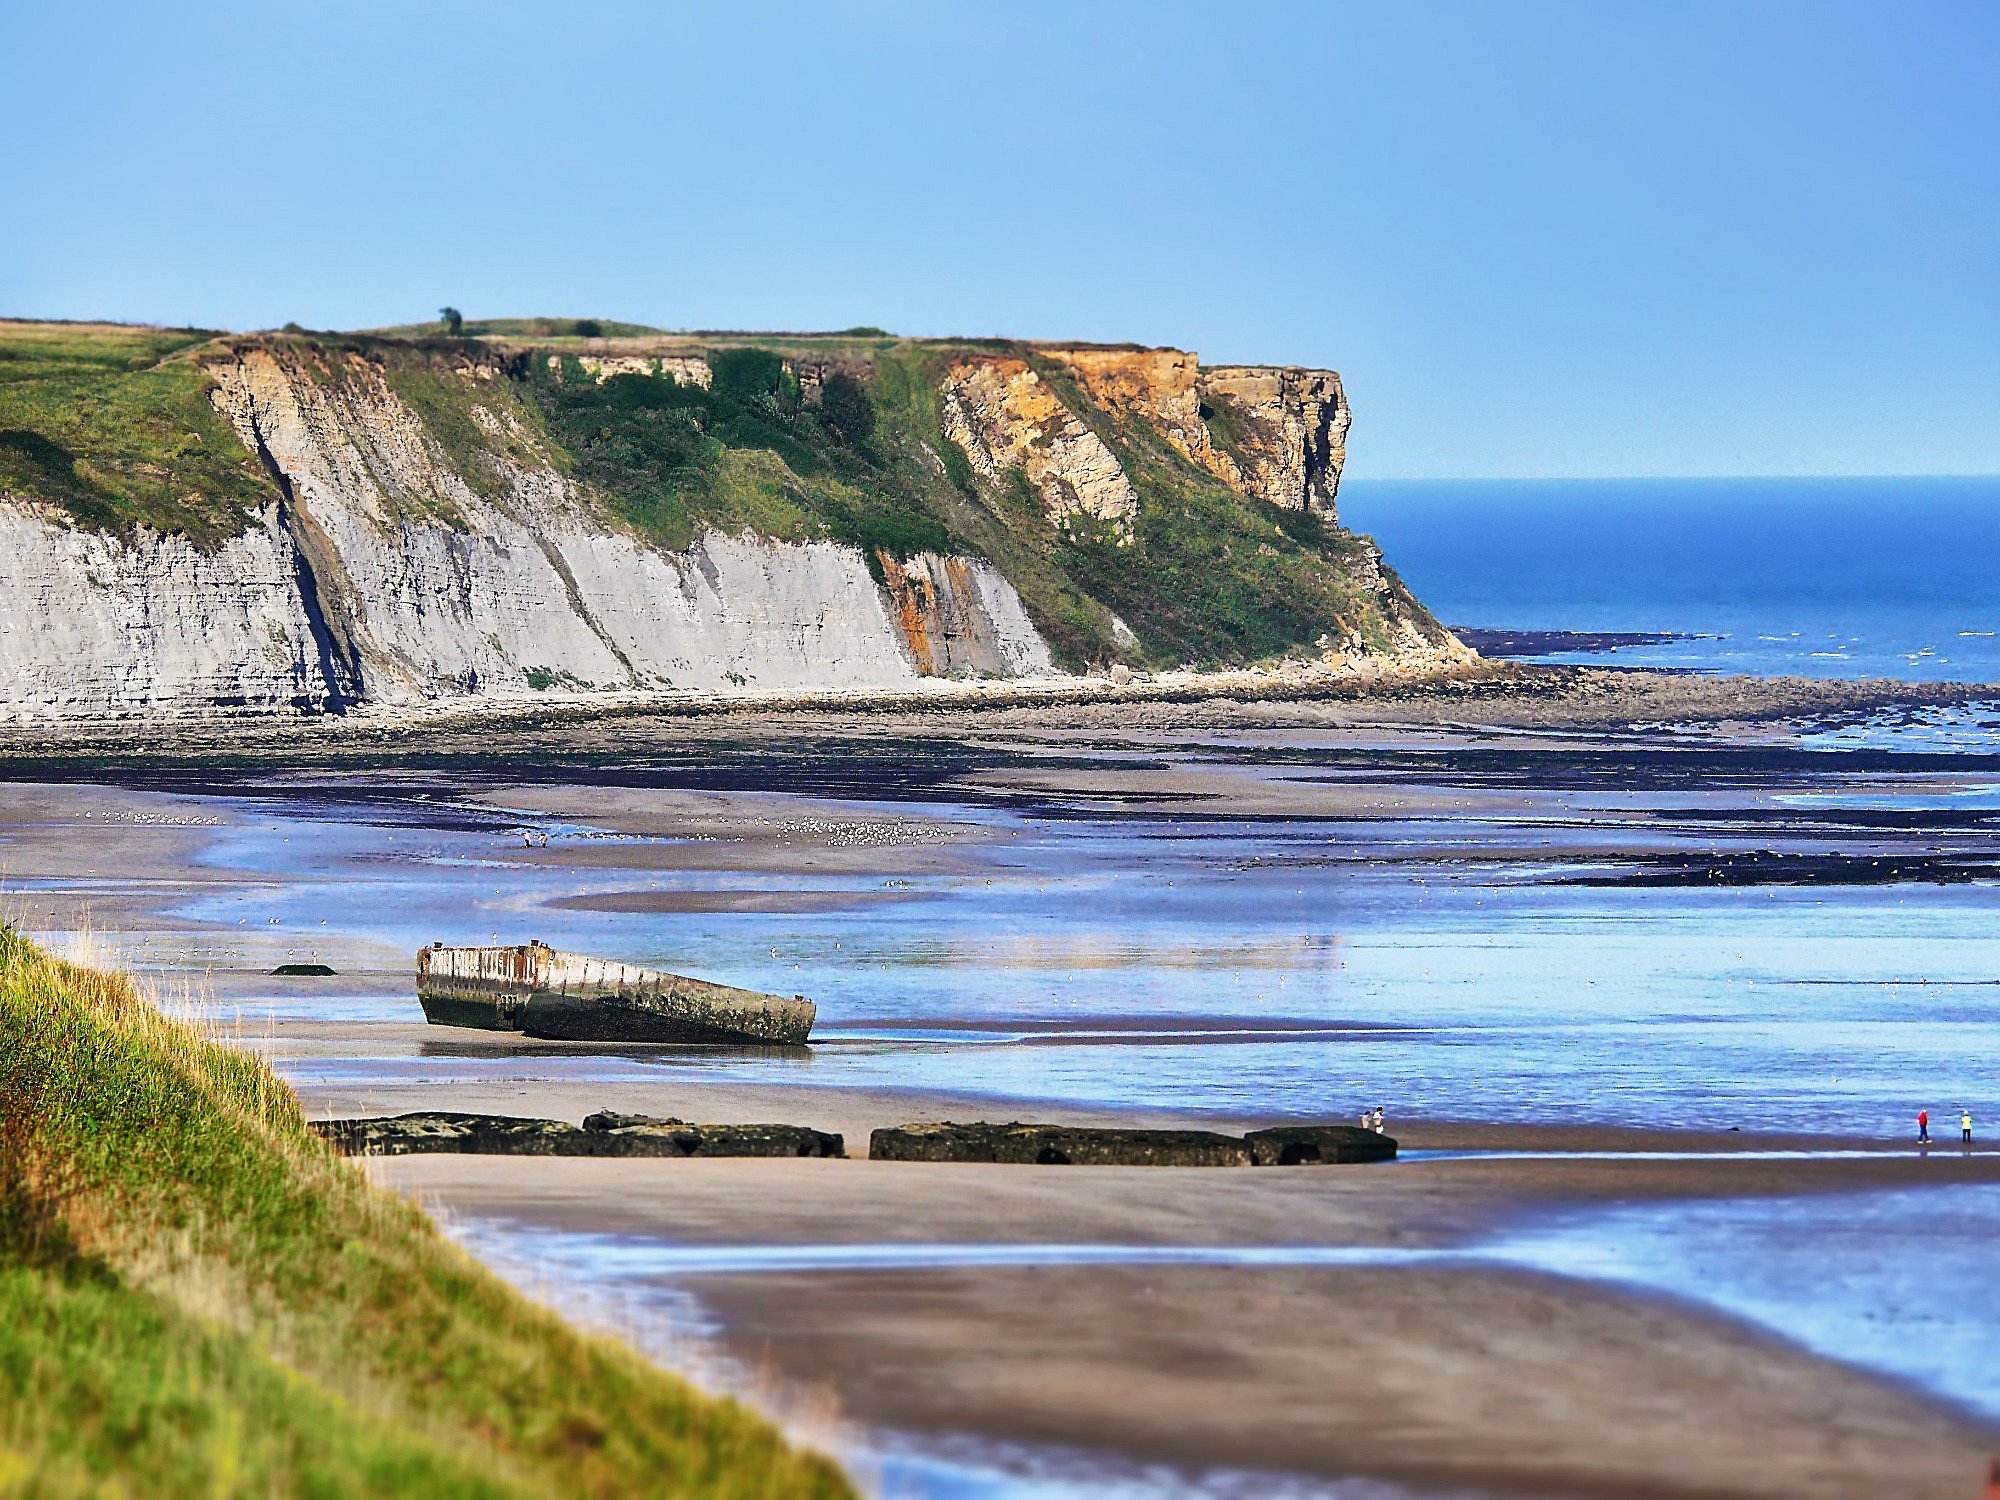 normandy sightseeing tour